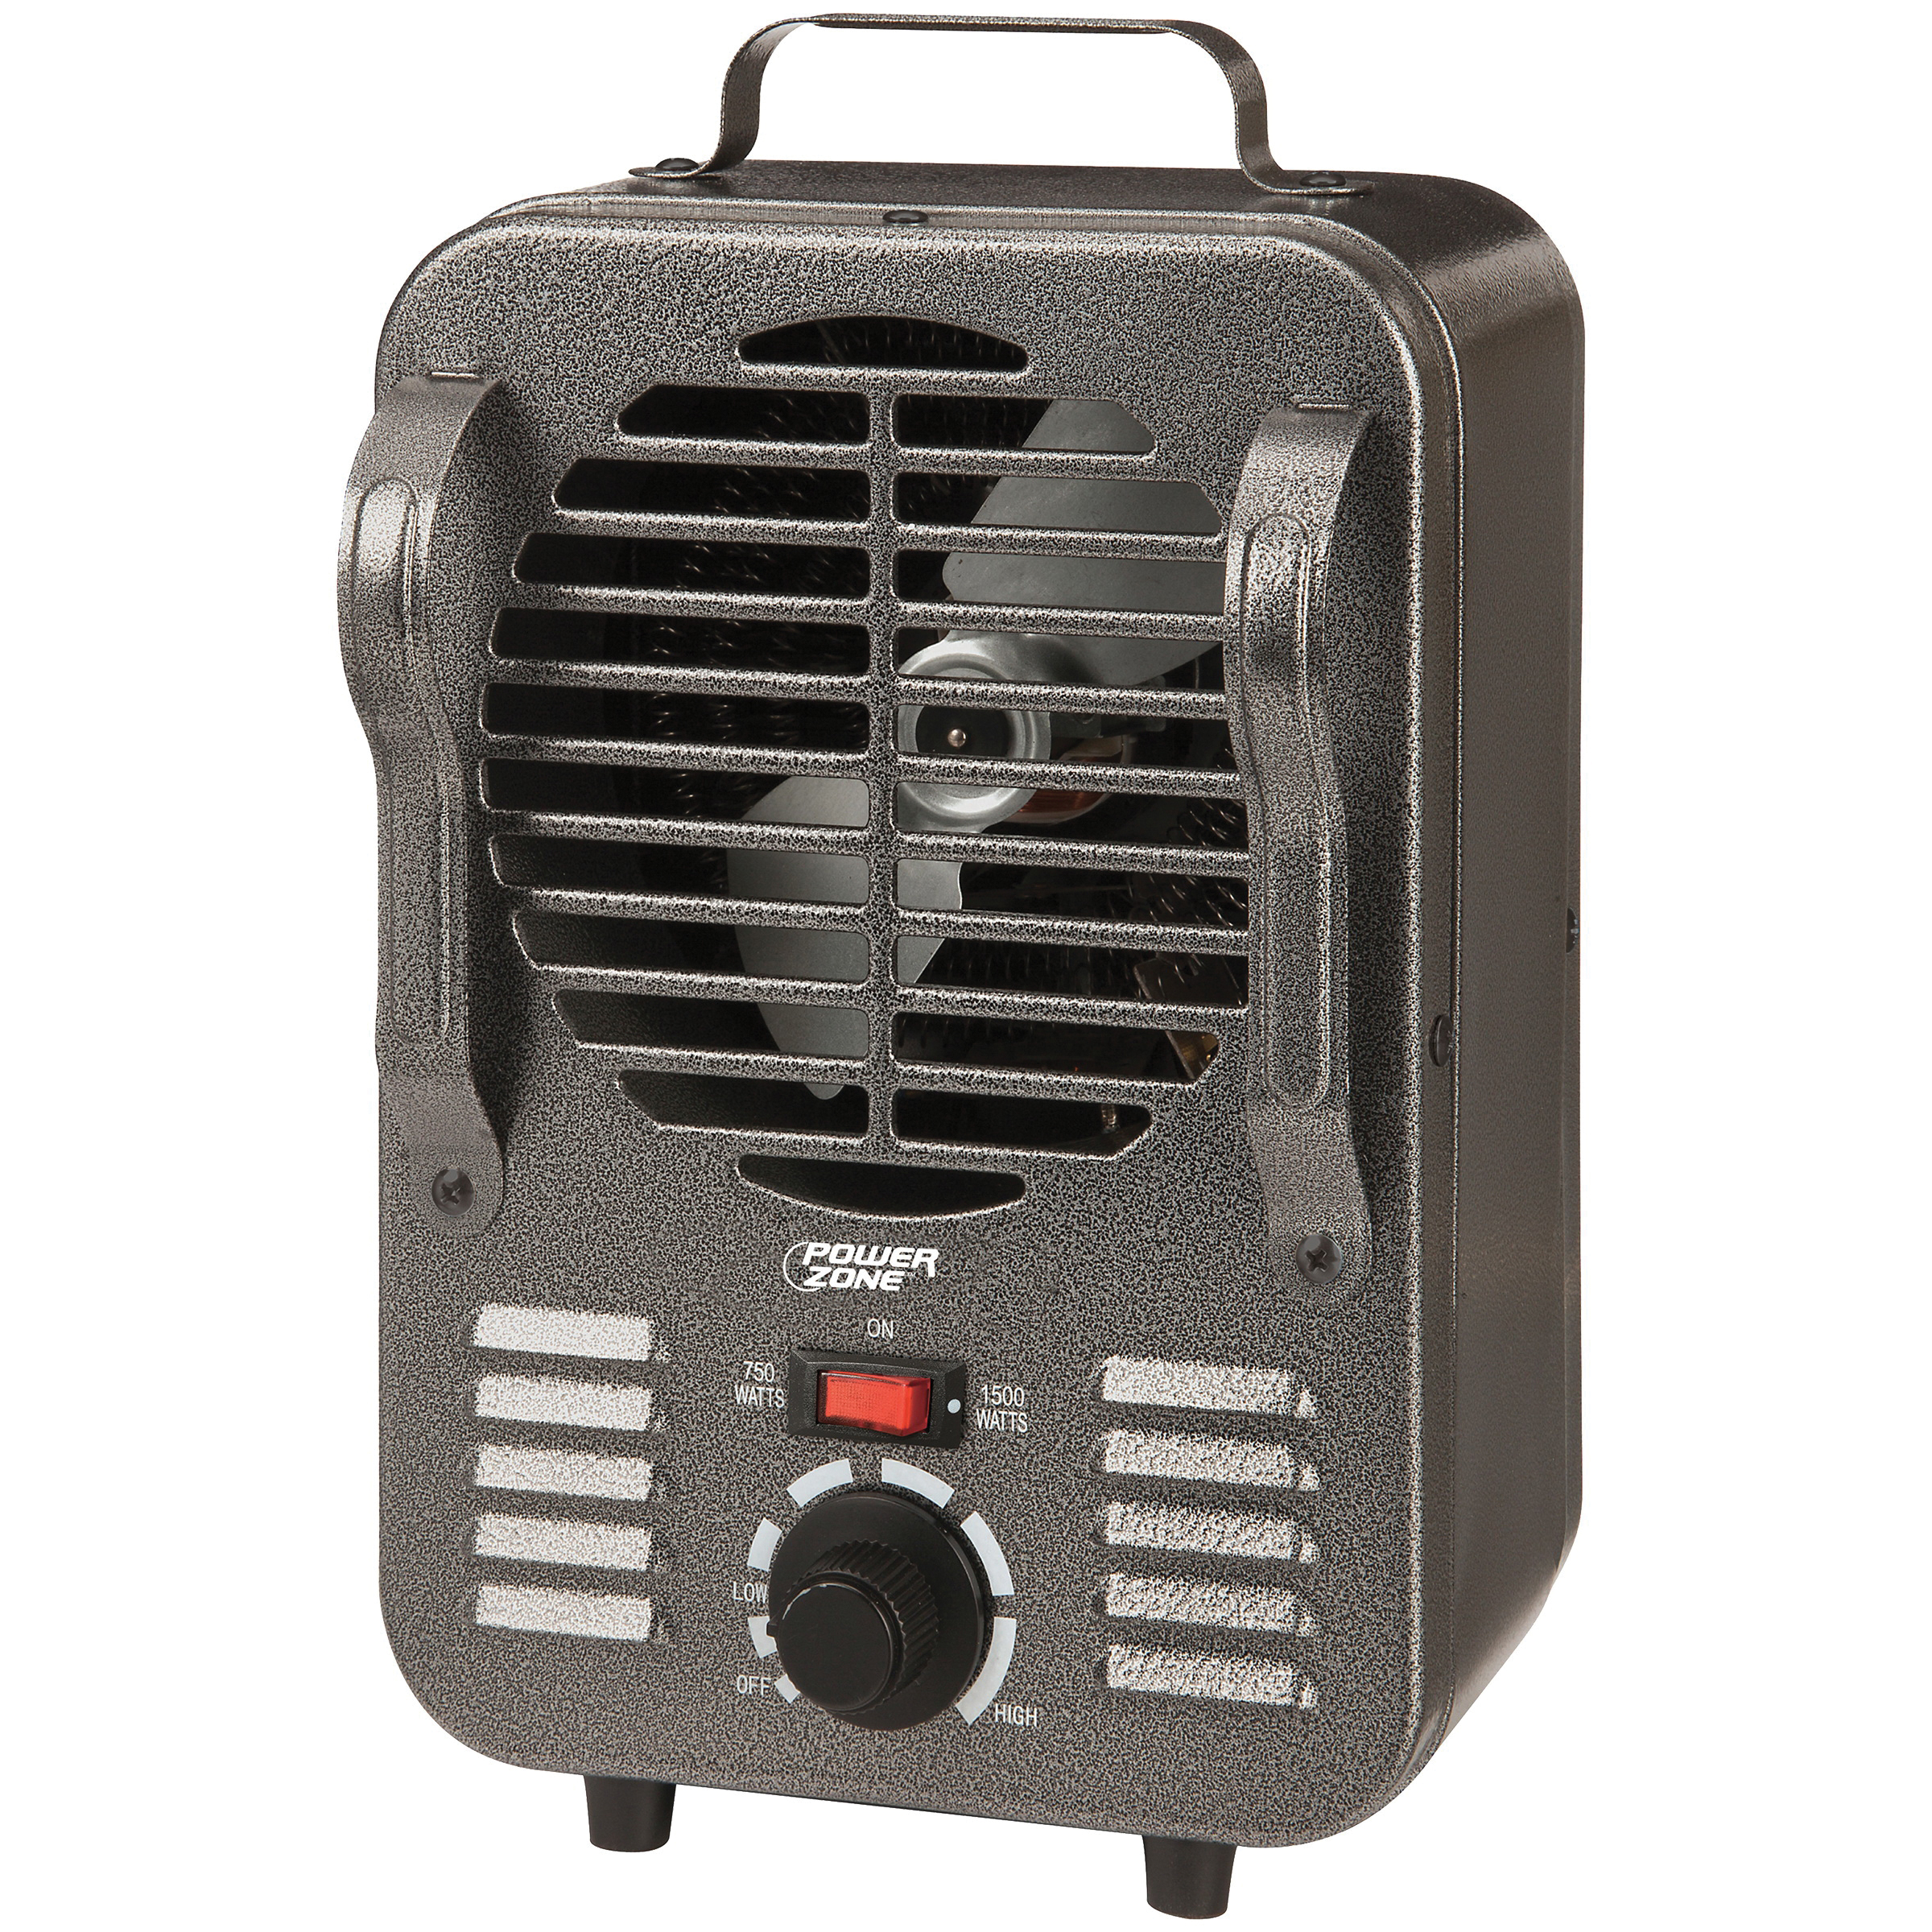 LH872 Mini Milkhouse Heater, 12.5 A, 120 V, 750/1500 W, 1500 W Heating, 2-Heating Stage, Gray